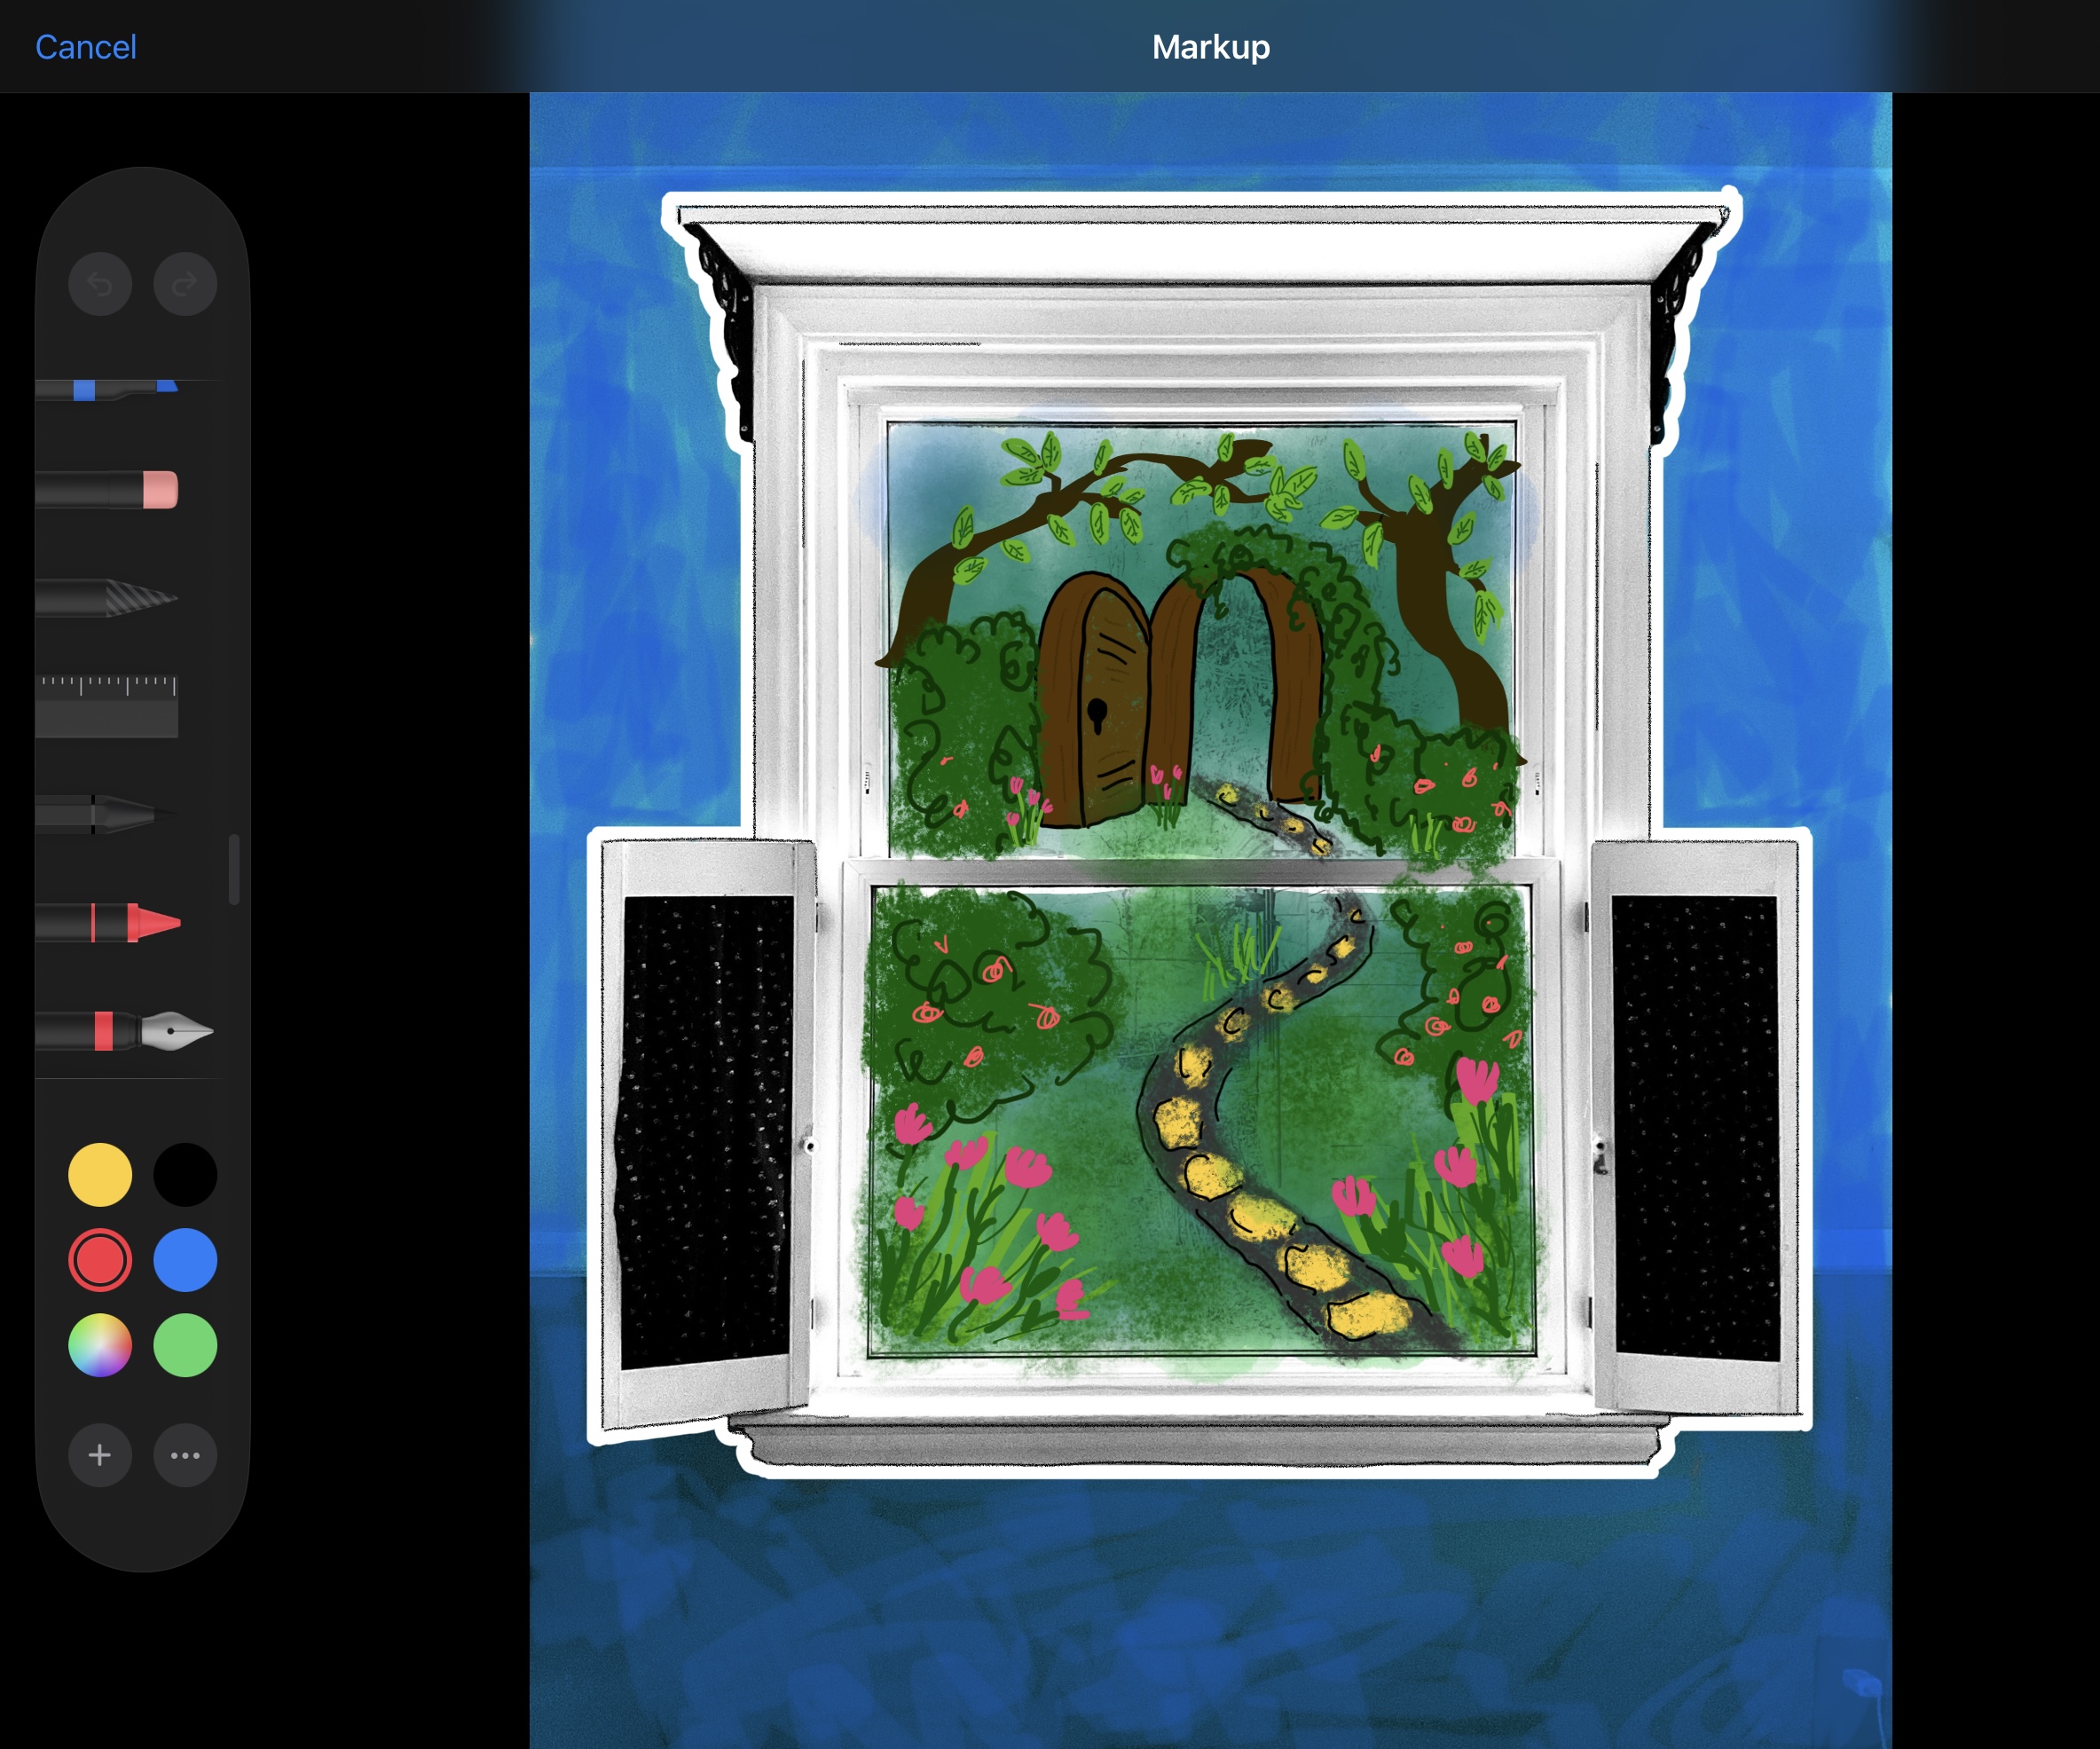 A photo of a window containing a drawing a garden. Markup drawing tools are on the left side of the image.